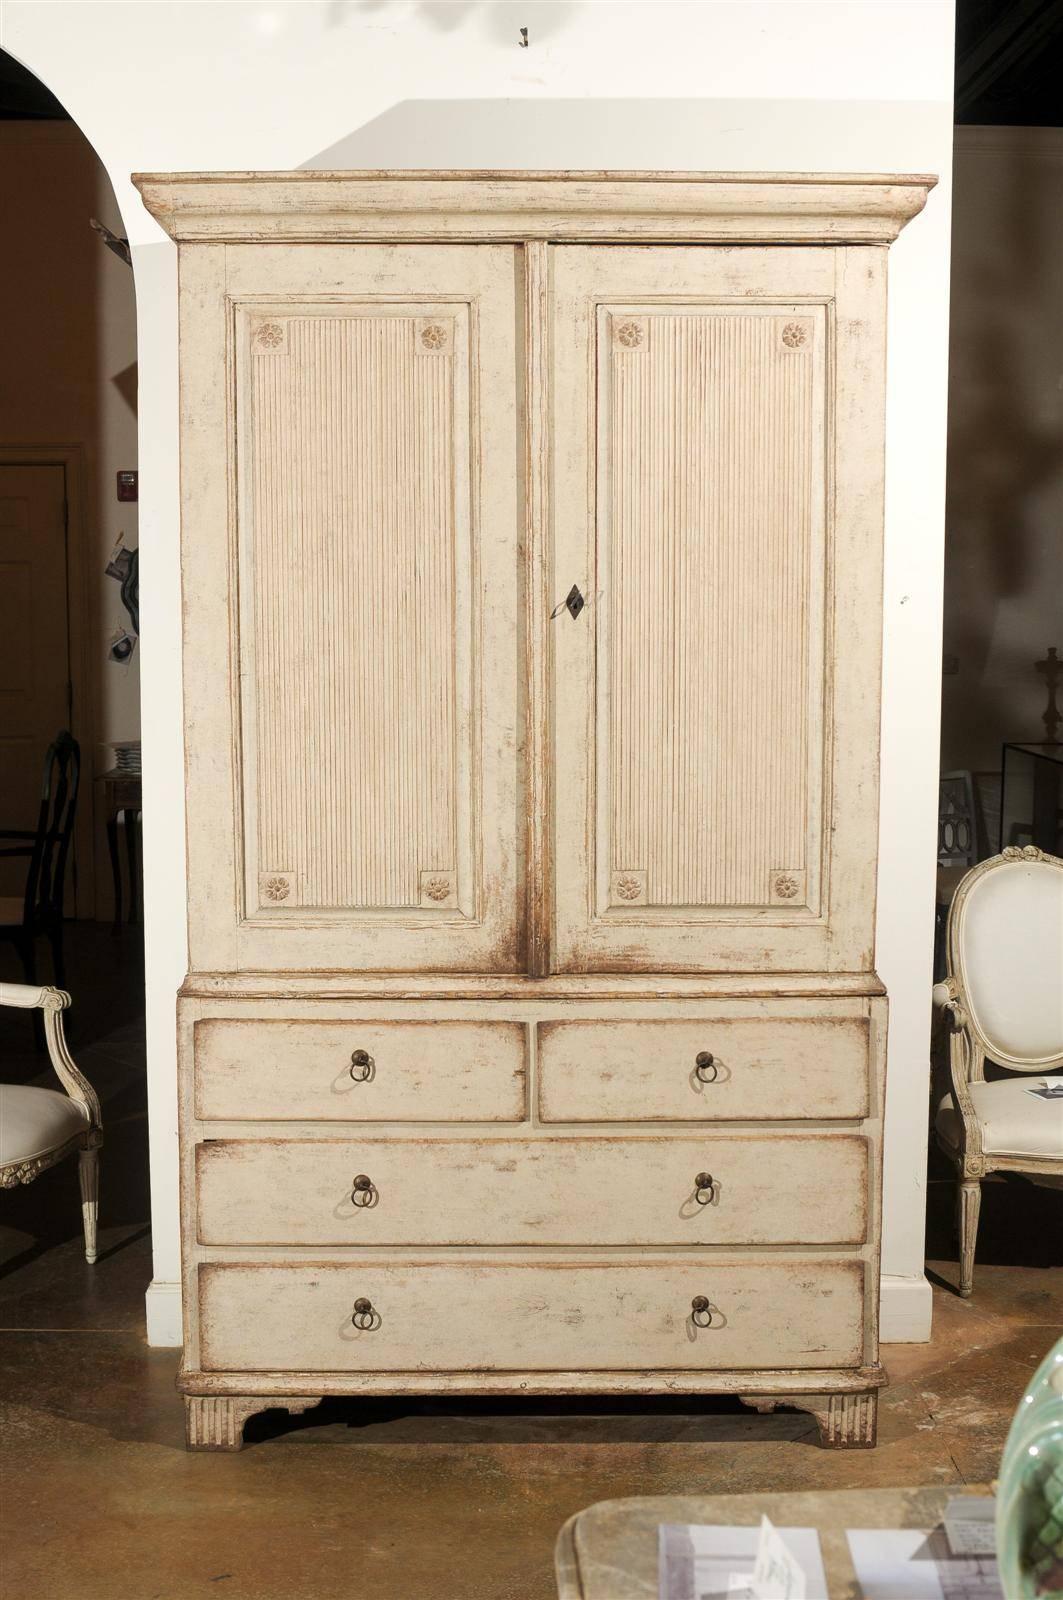 A Swedish Gustavian style painted wood two-part linen press with two doors in the upper cabinet over four drawers from the mid 19th century. This Swedish painted wood cabinet features a large molded cornice sitting above two tall reeded doors